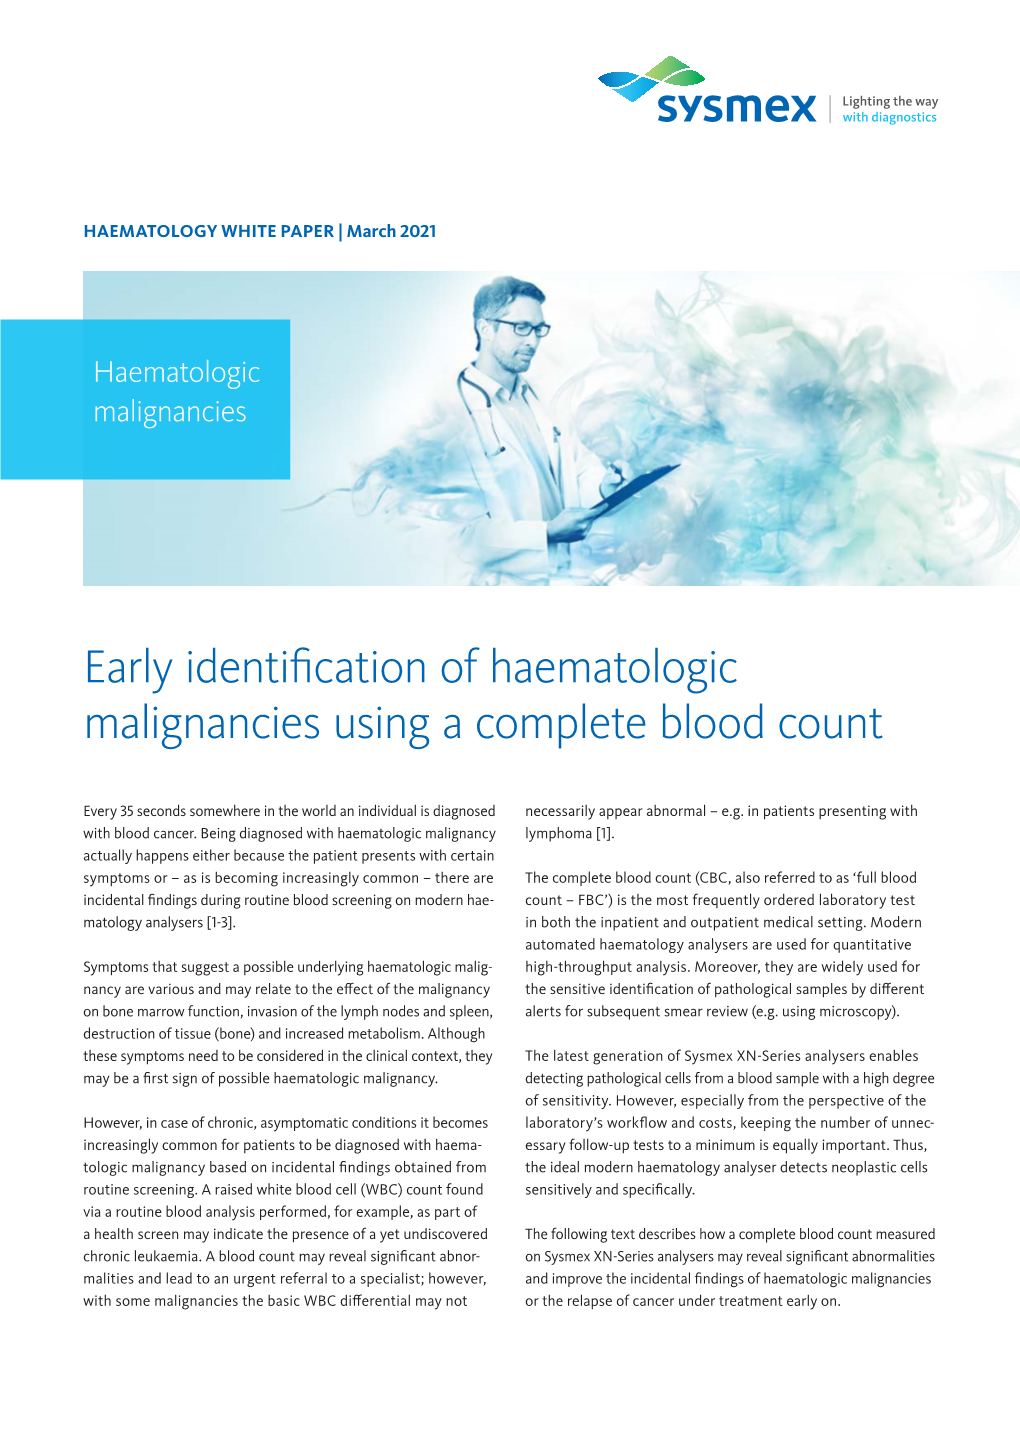 Early Identification of Haematologic Malignancies Using a Complete Blood Count